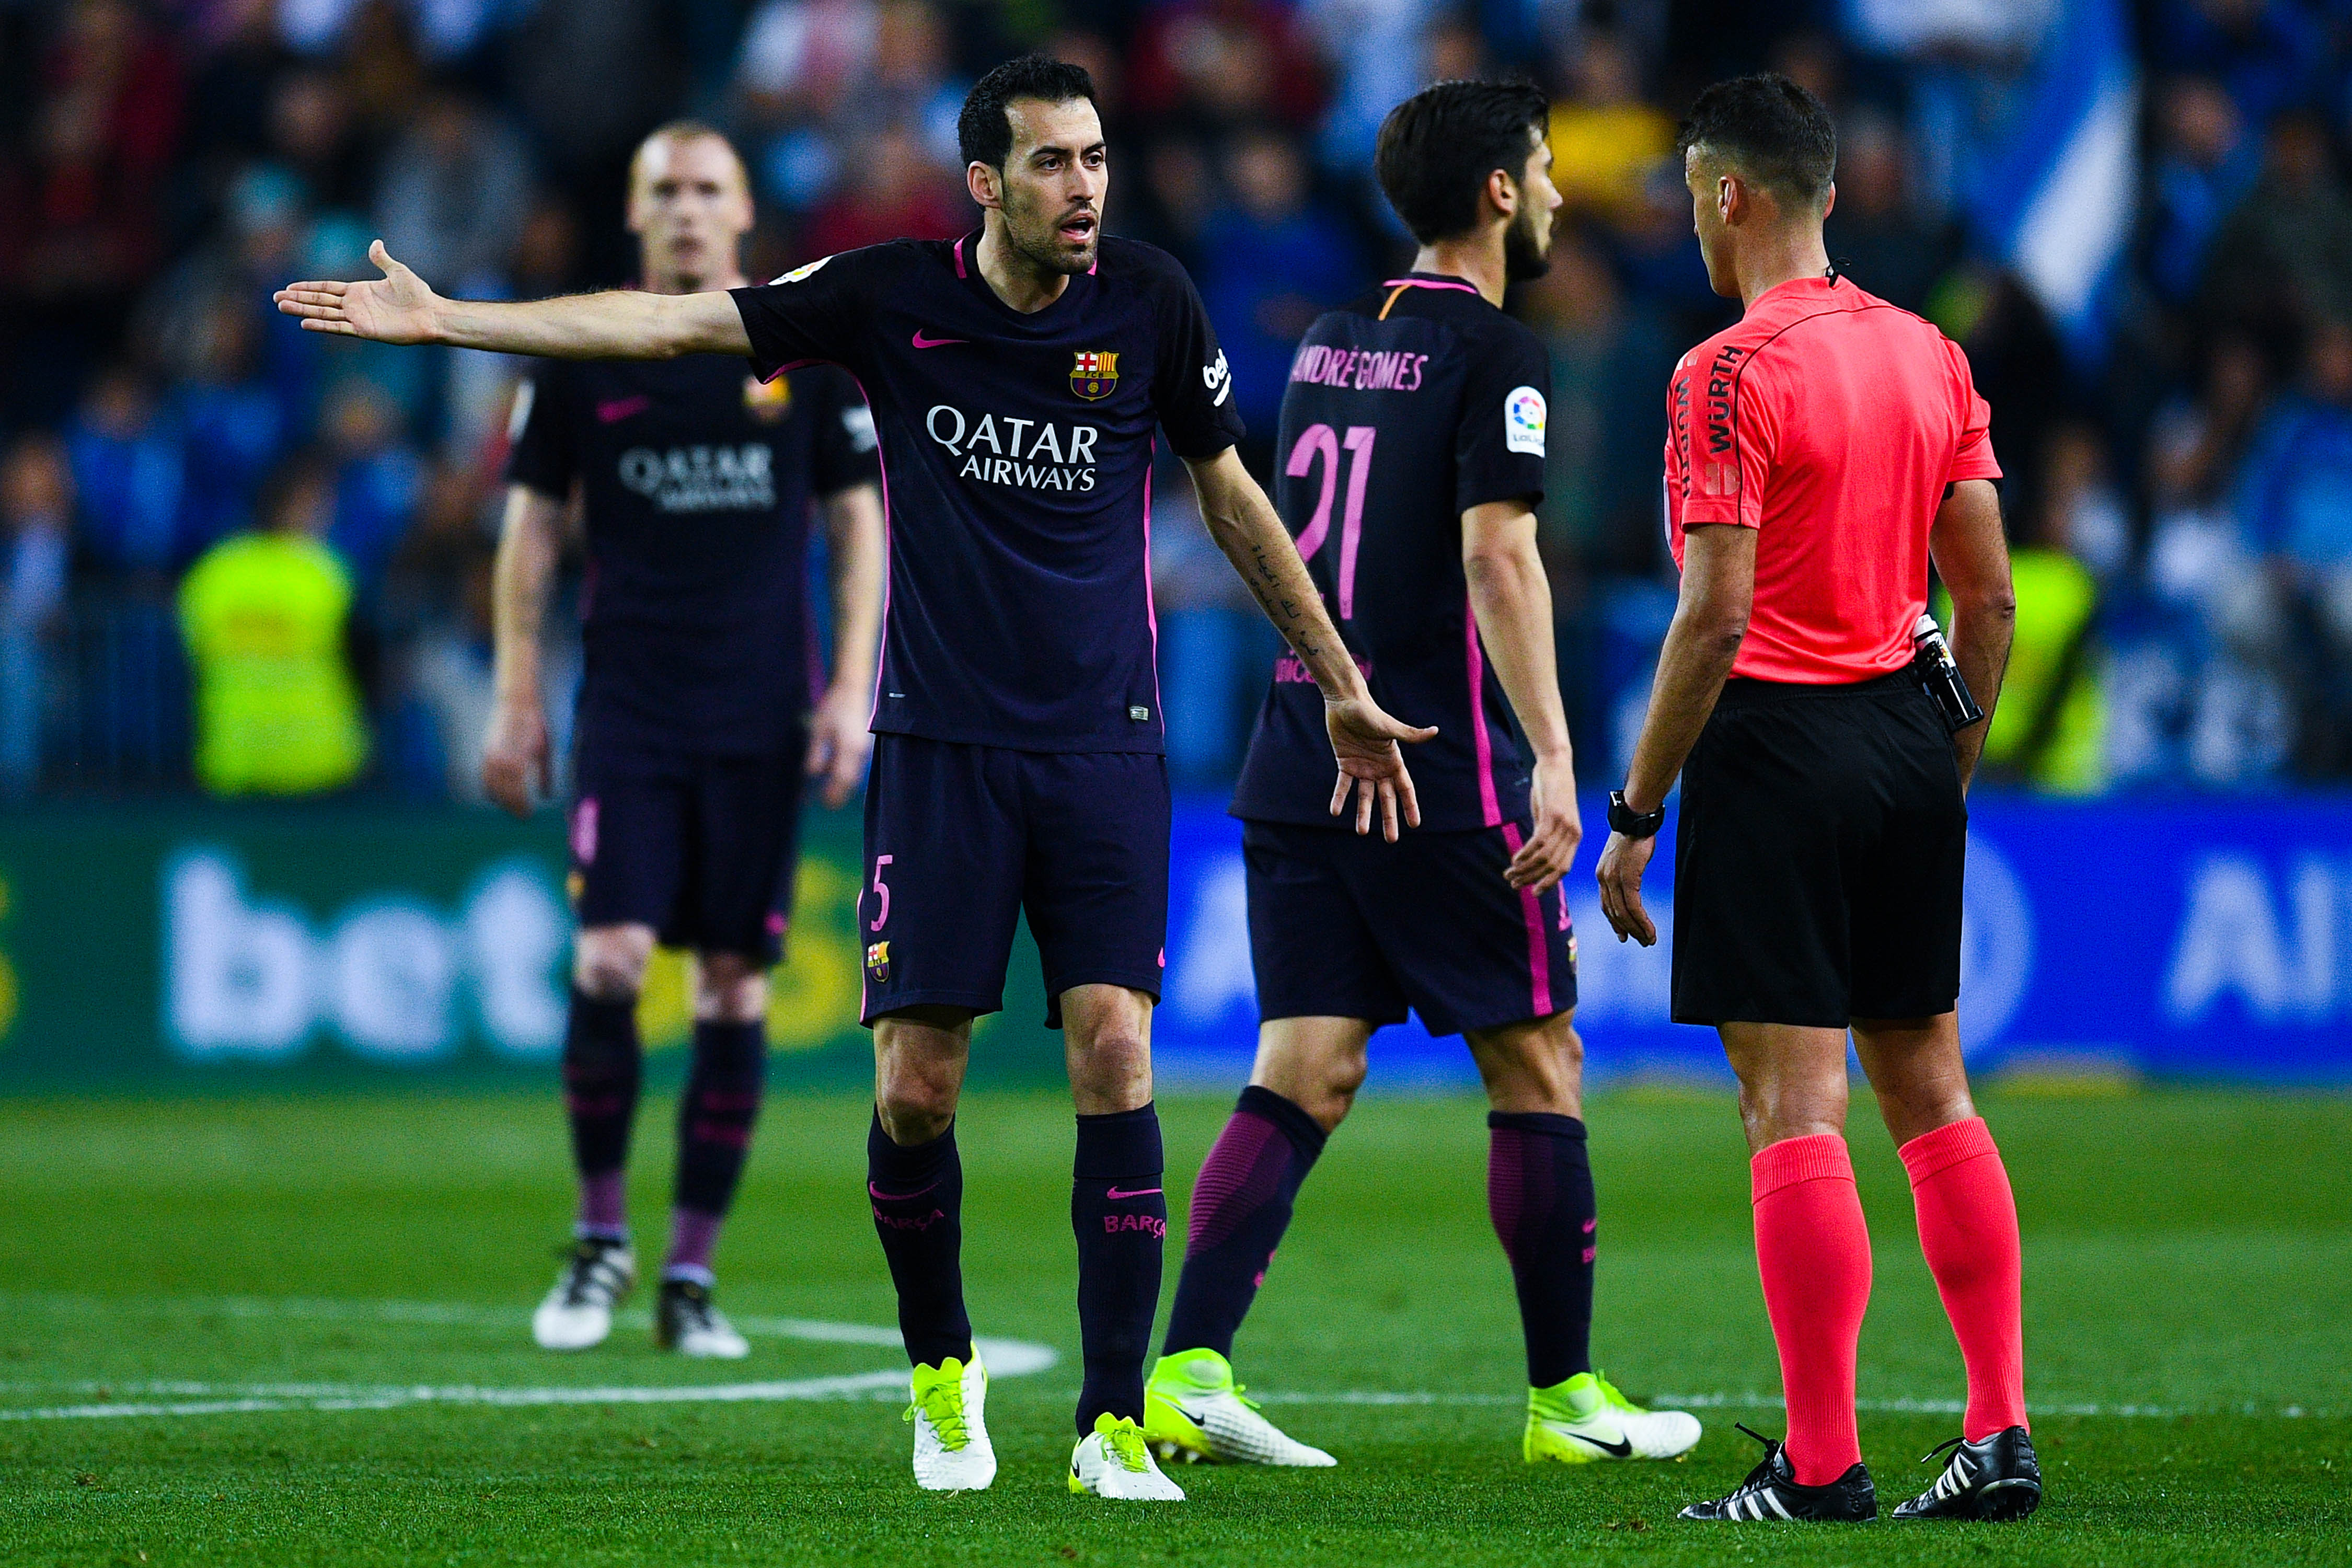 MALAGA, SPAIN - APRIL 08: Sergio Busquets of FC Barcelona argues with the referee during the La Liga match between Malaga CF and FC Barcelona at La Rosaleda stadium on April 8, 2017 in Malaga, Spain.  (Photo by David Ramos/Getty Images)